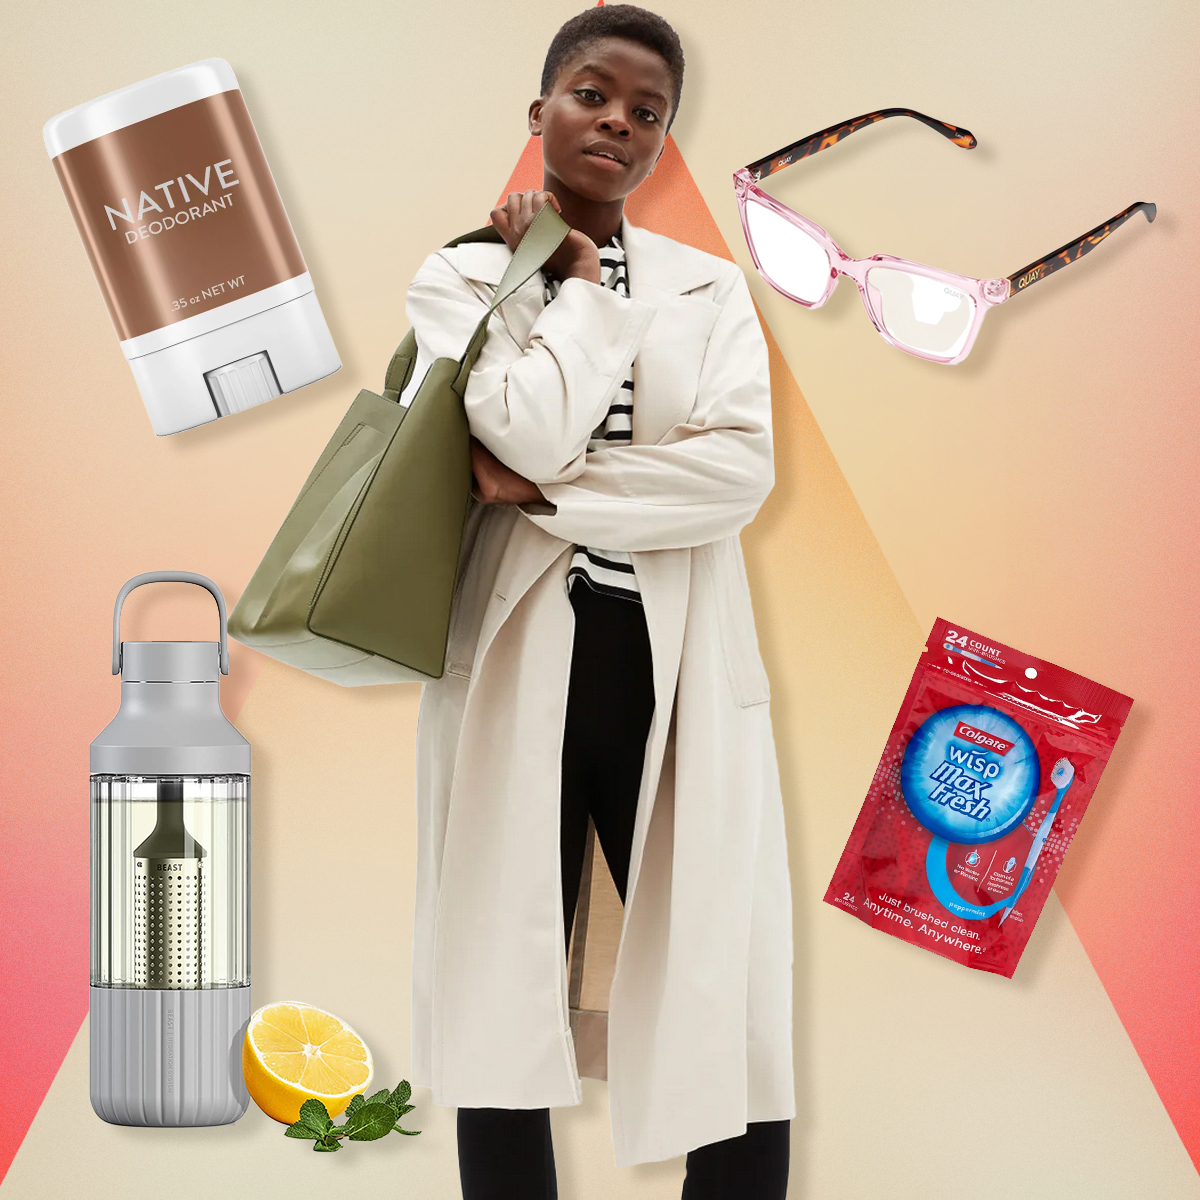 WHAT'S IN MY BAG FOR WORK, EVERYDAY WORK ESSENTIALS 2021